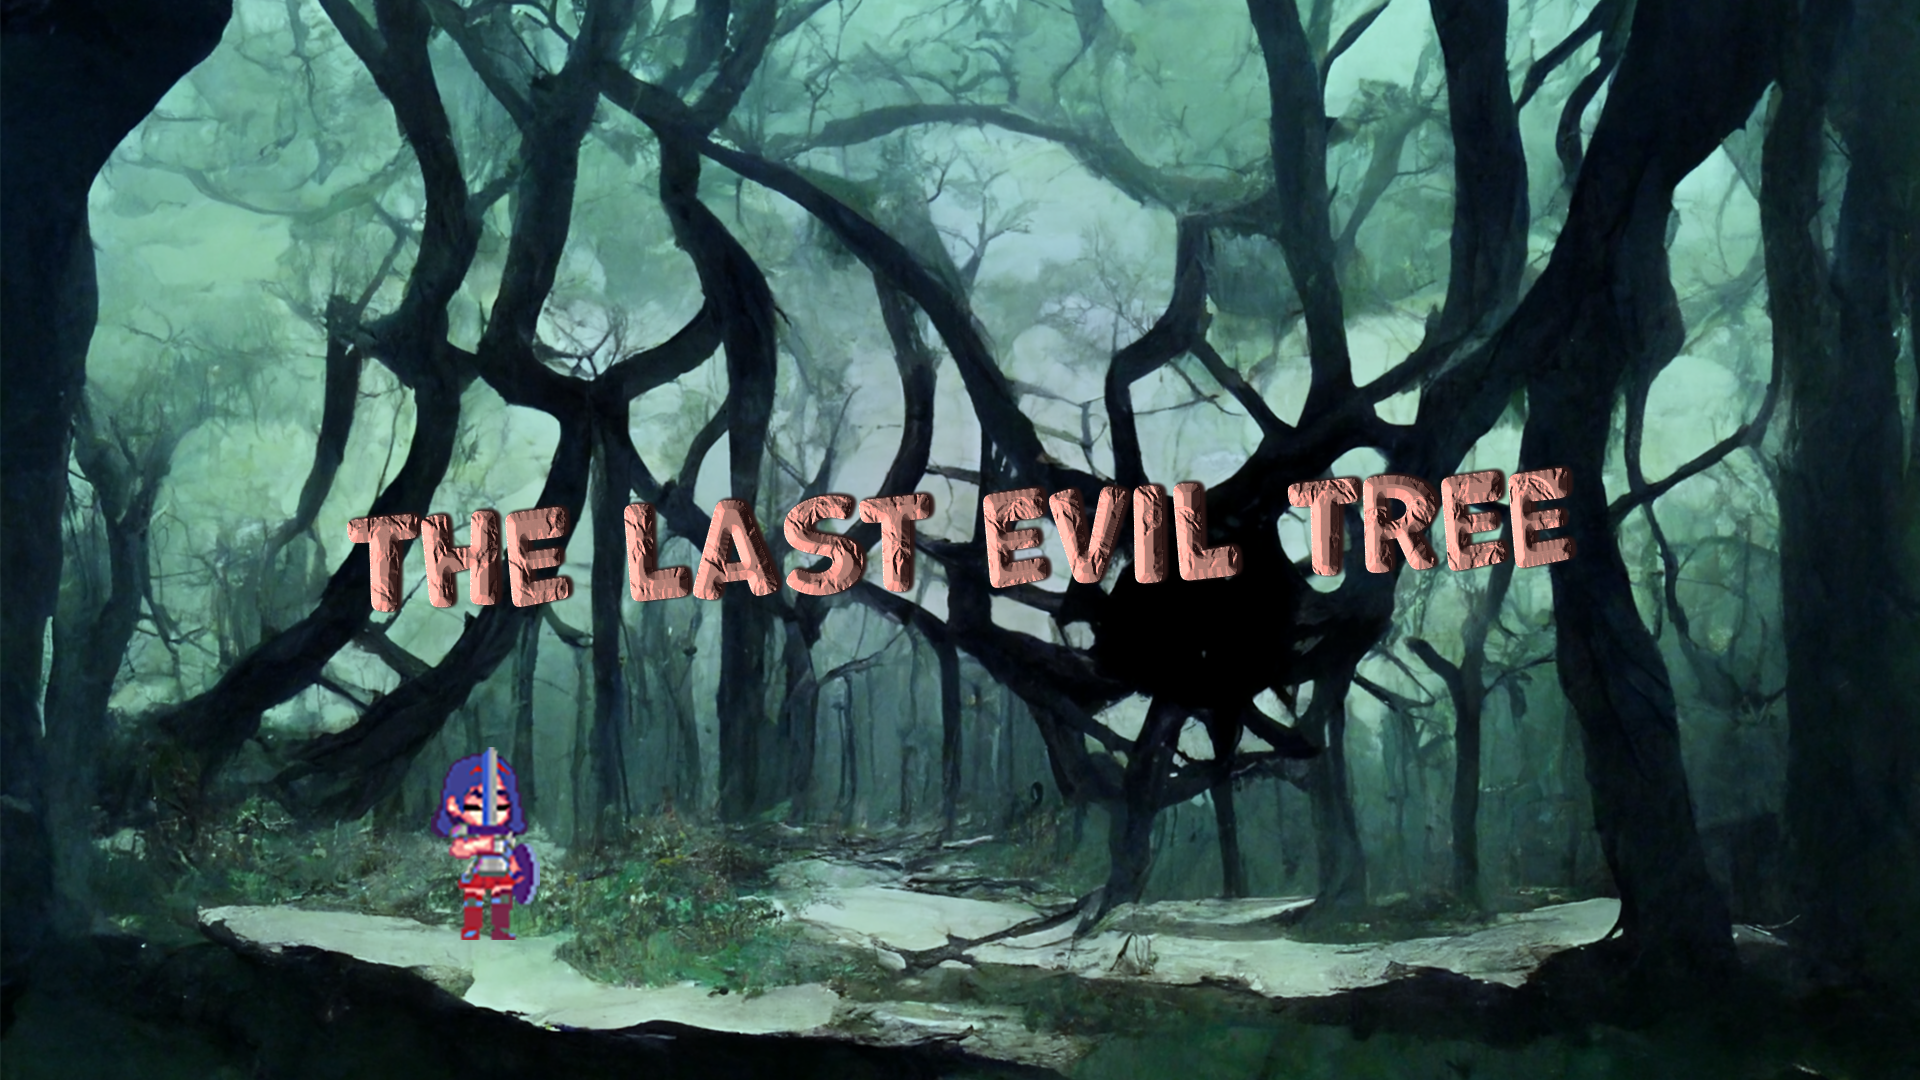 The Last Evil Tree by Malisony